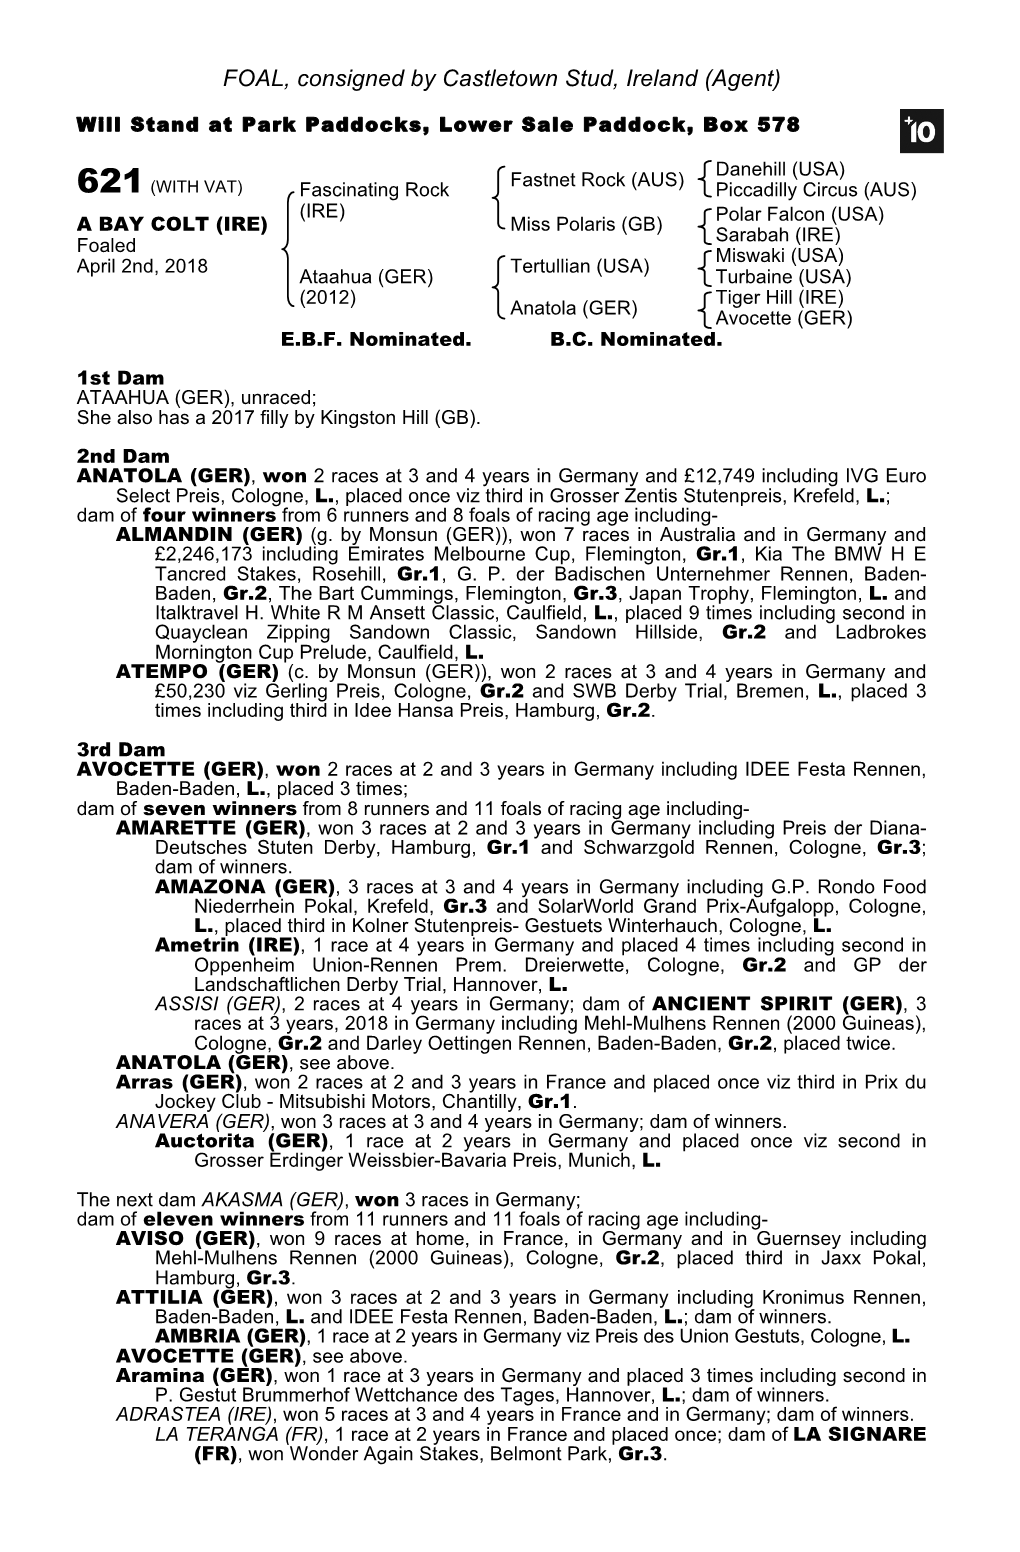 FOAL, Consigned by Castletown Stud, Ireland (Agent)